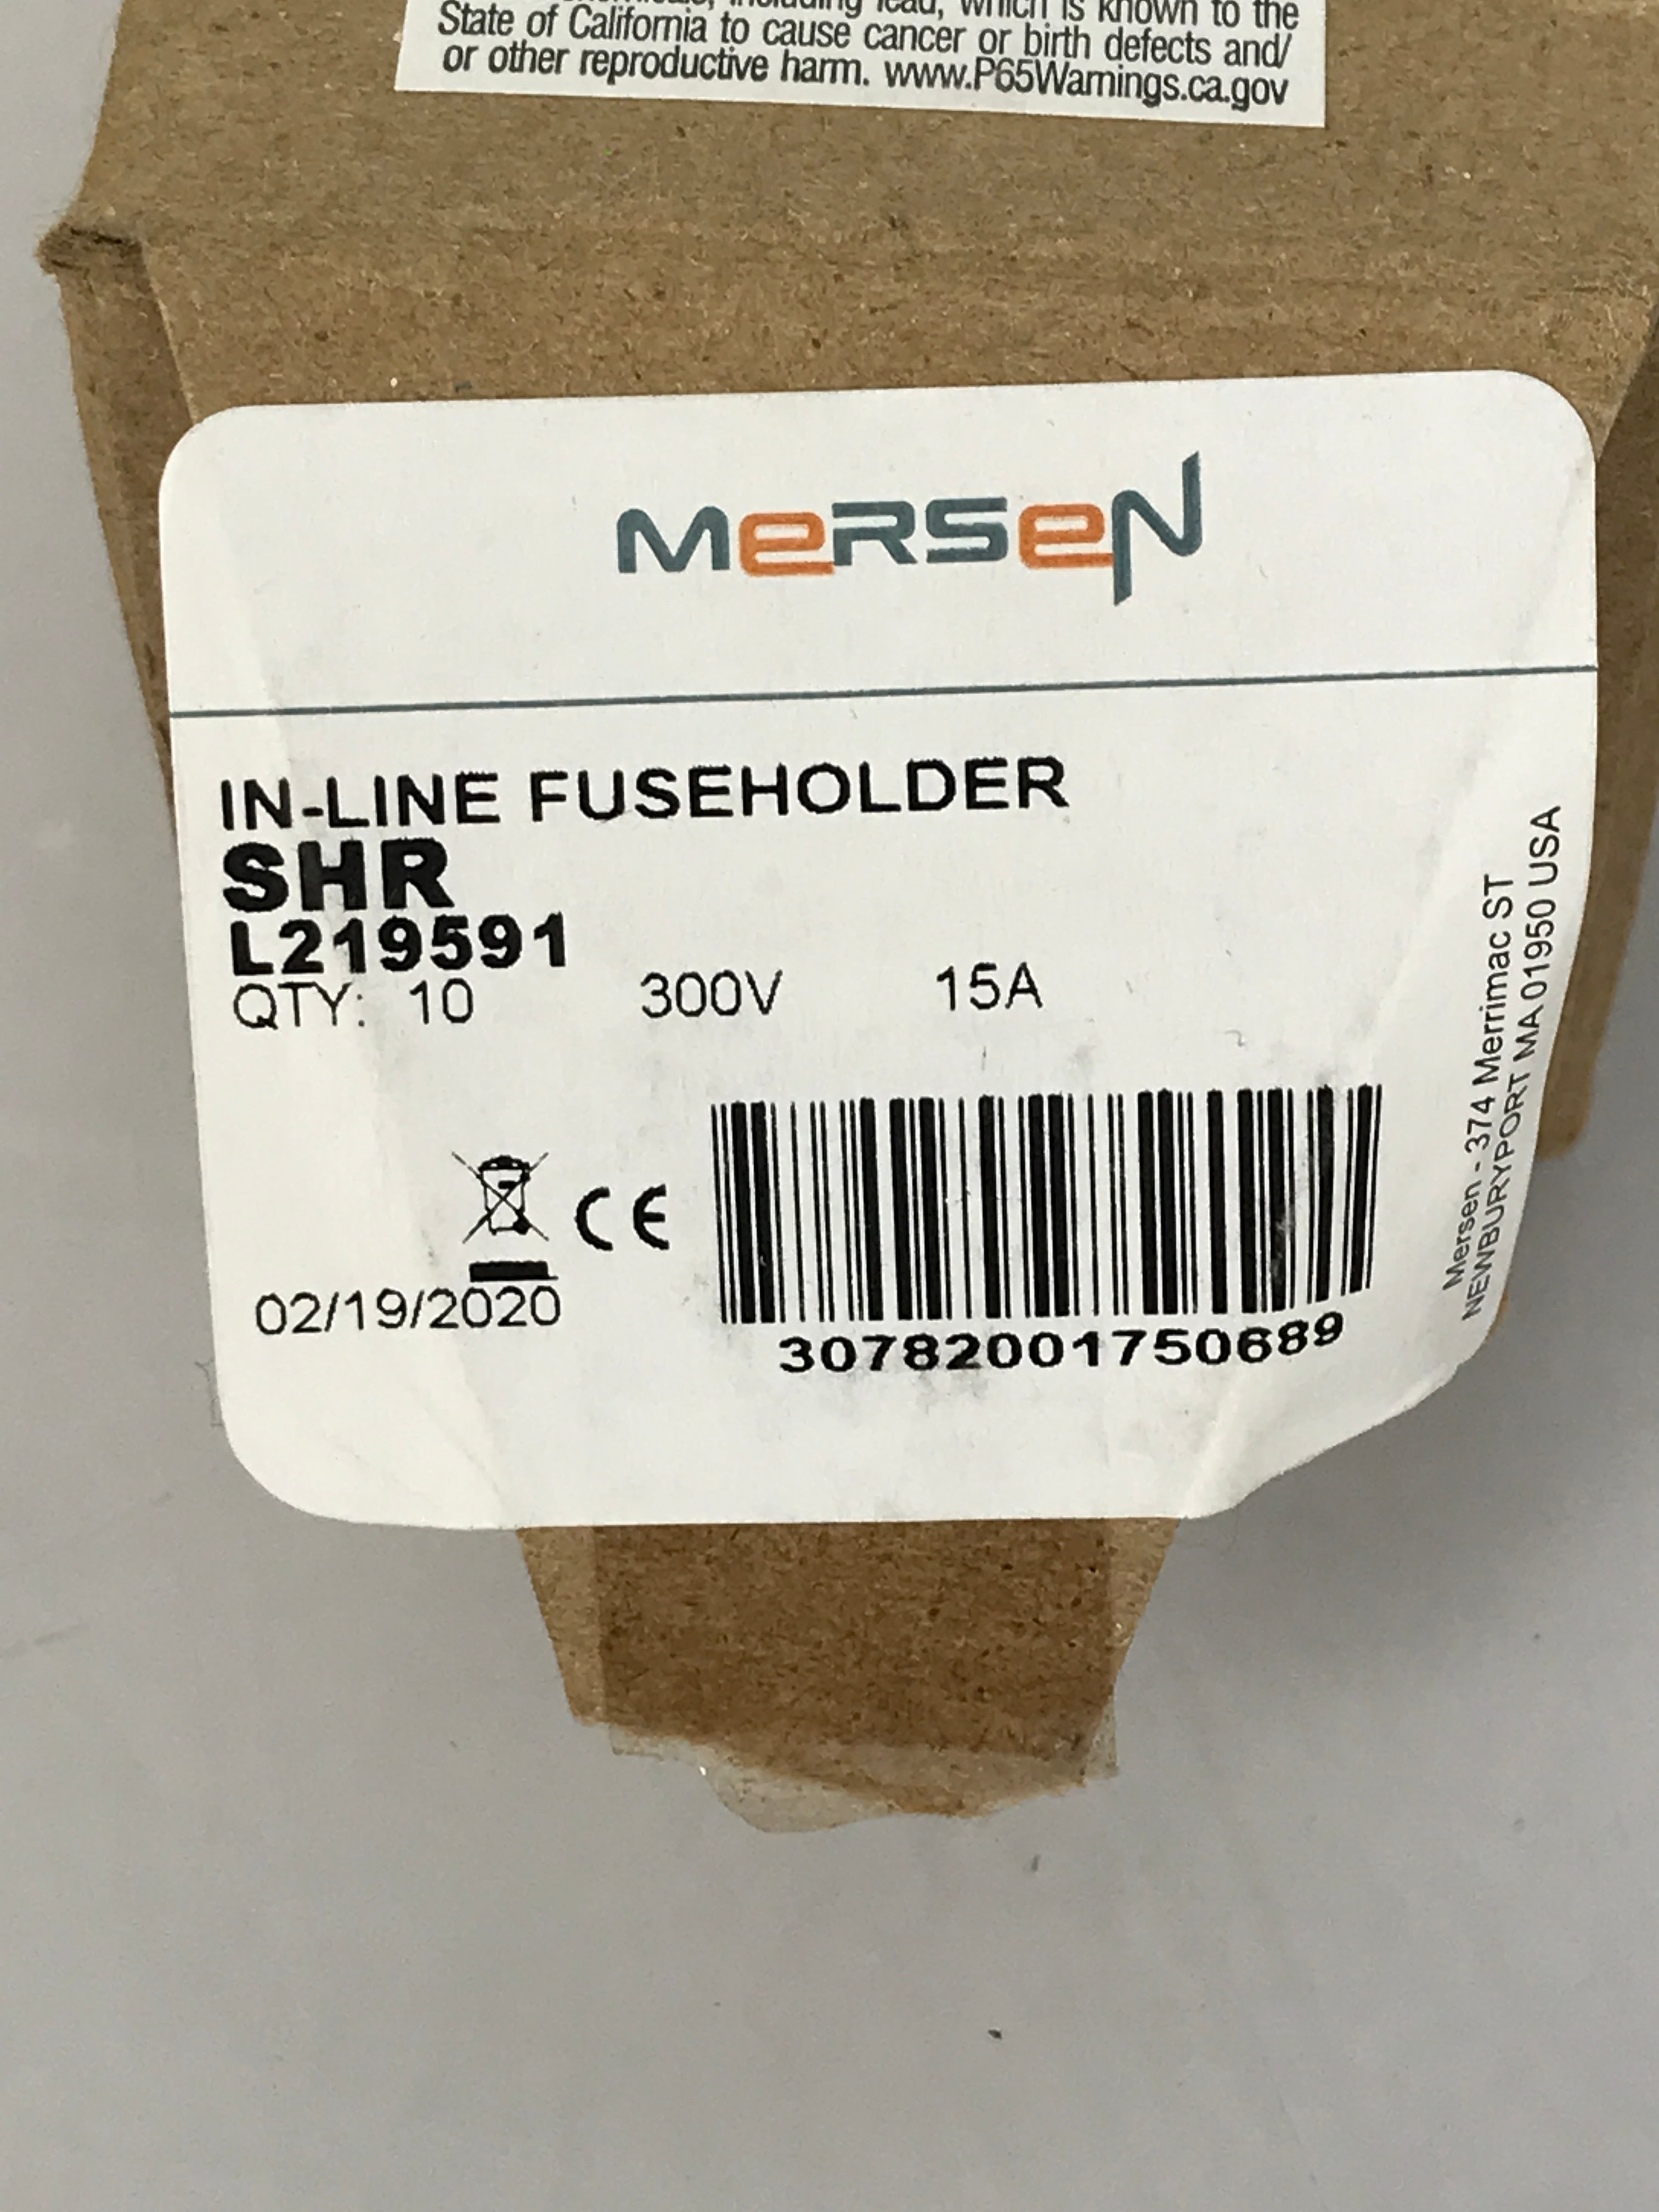 Lot of 10 Mersen In-Line Panel Mount Fuse Holder 300V 15A New in Box